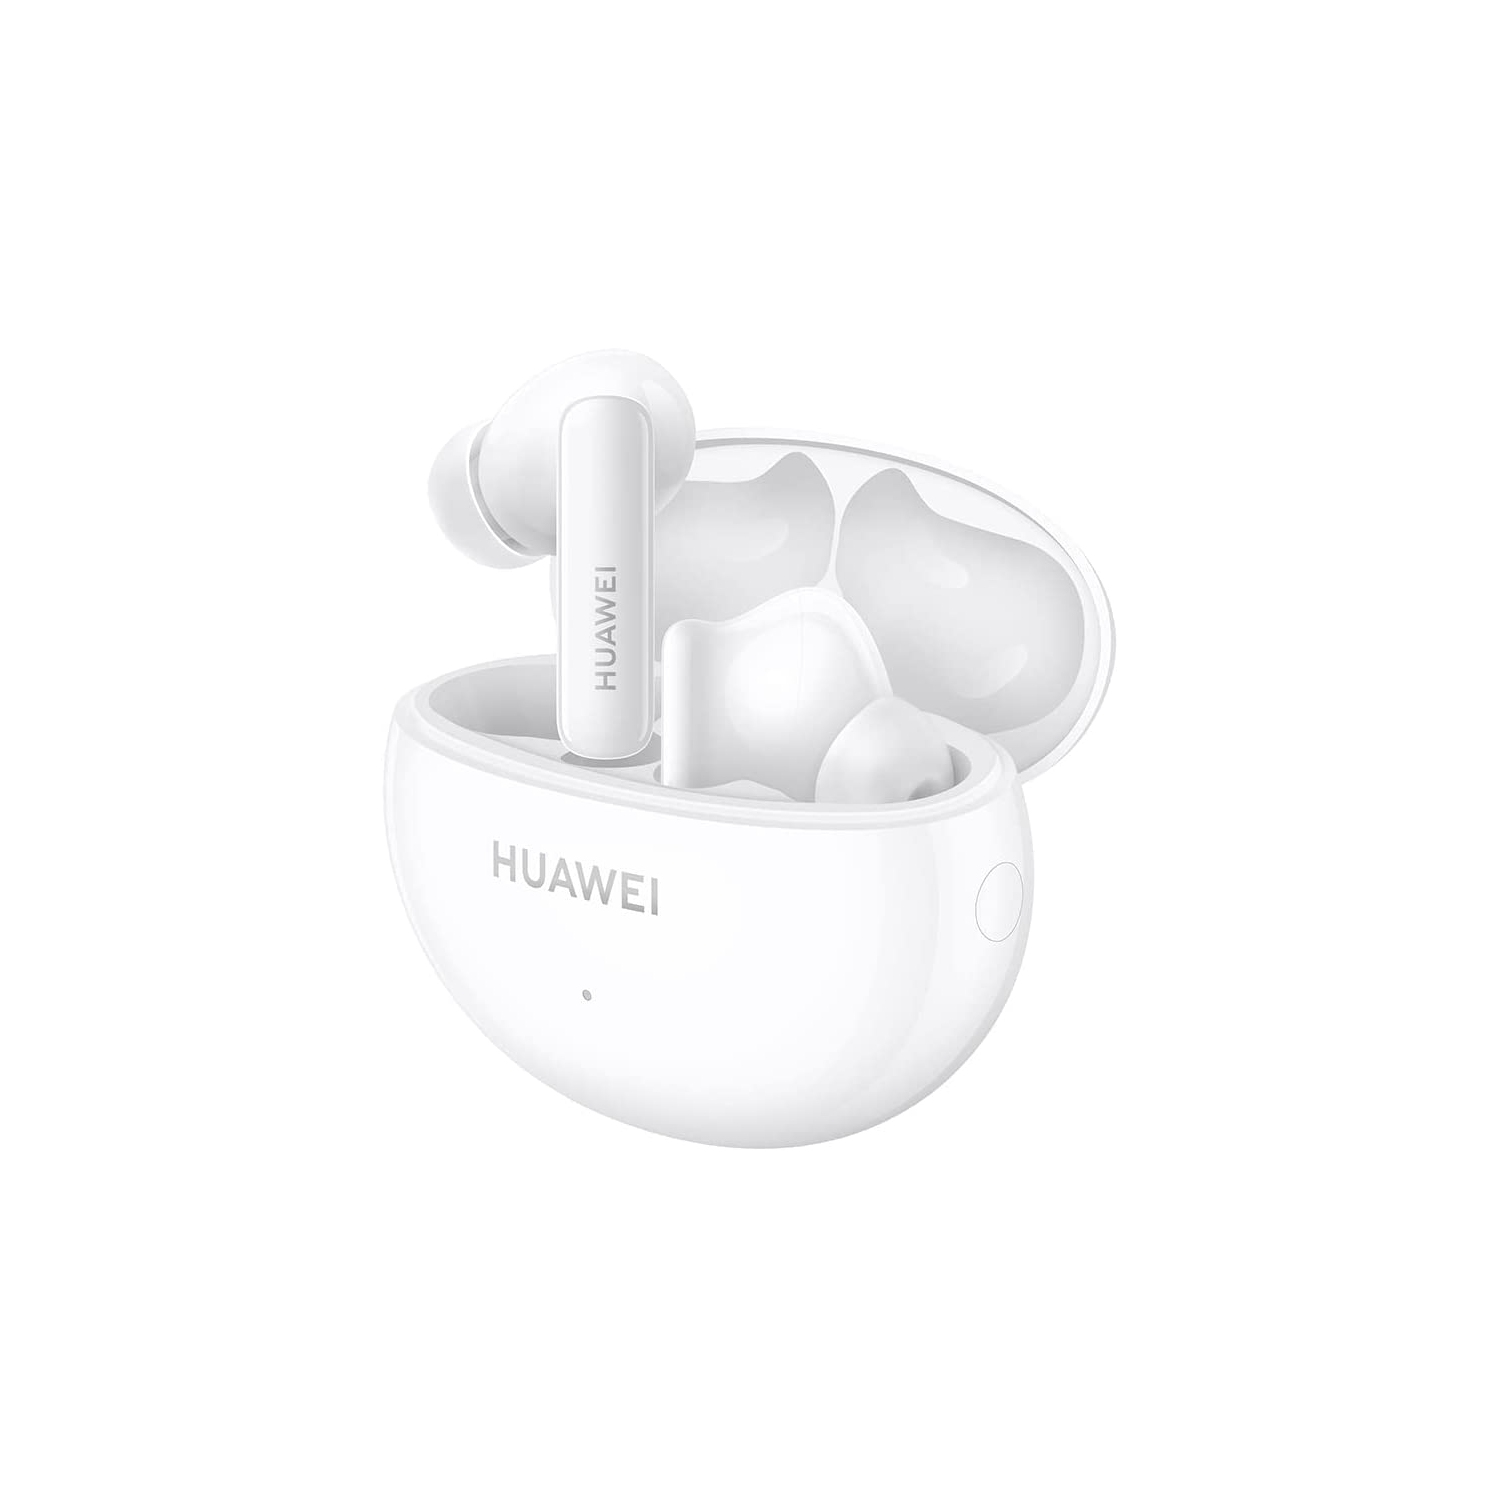 HUAWEI FreeBuds 5i Wireless Earphone - TWS Bluetooth Earbuds, Hi-Res sound, multi-mode noise cancellation, 28 hr battery life, Dual device connection, Ceramic White